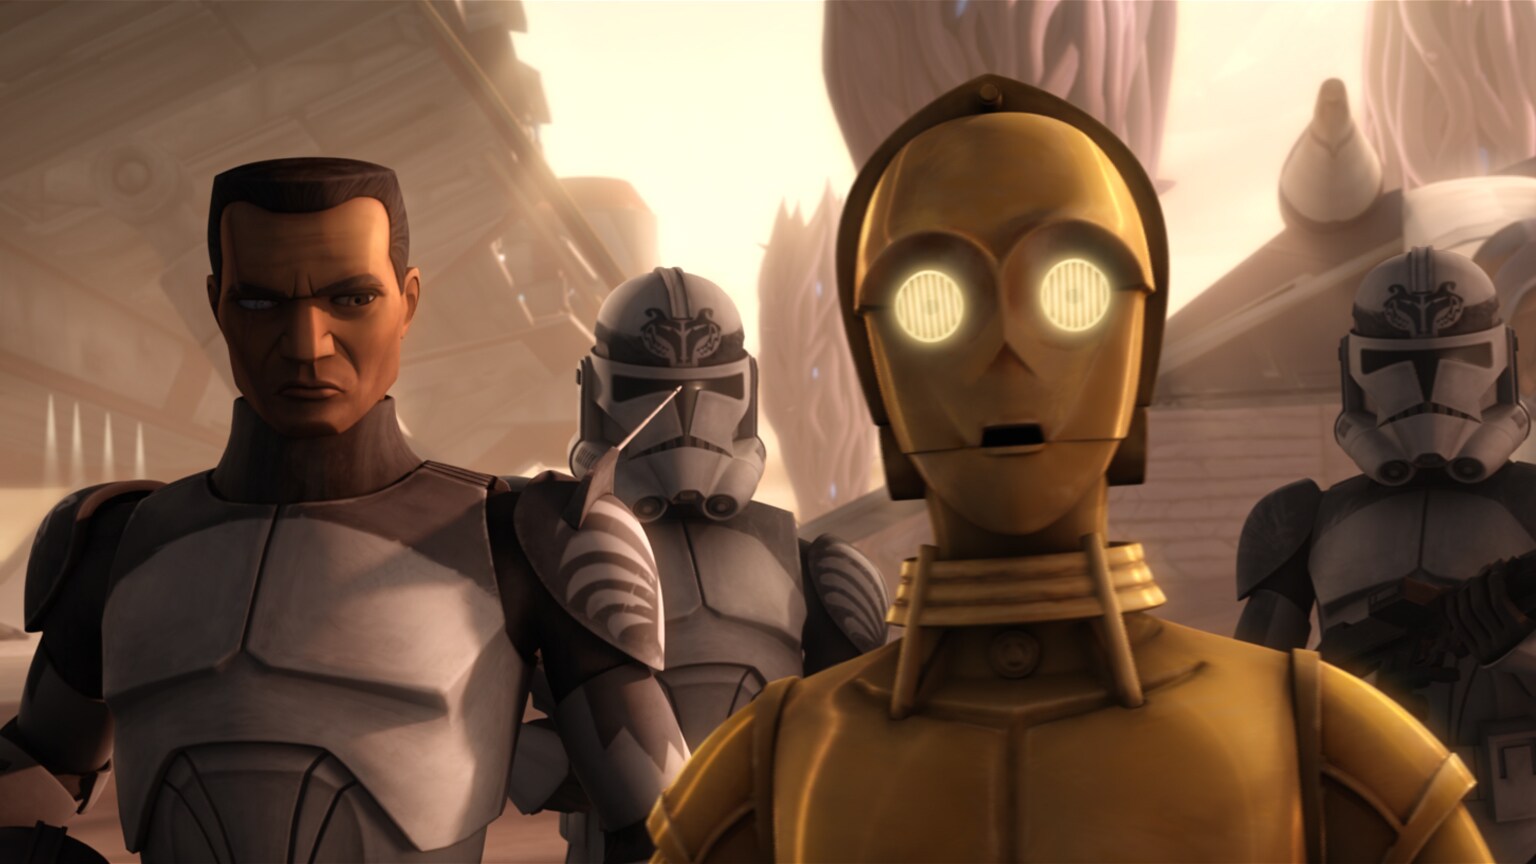 The Clone Wars Rewatch: Two Droids on a "Mercy Mission"